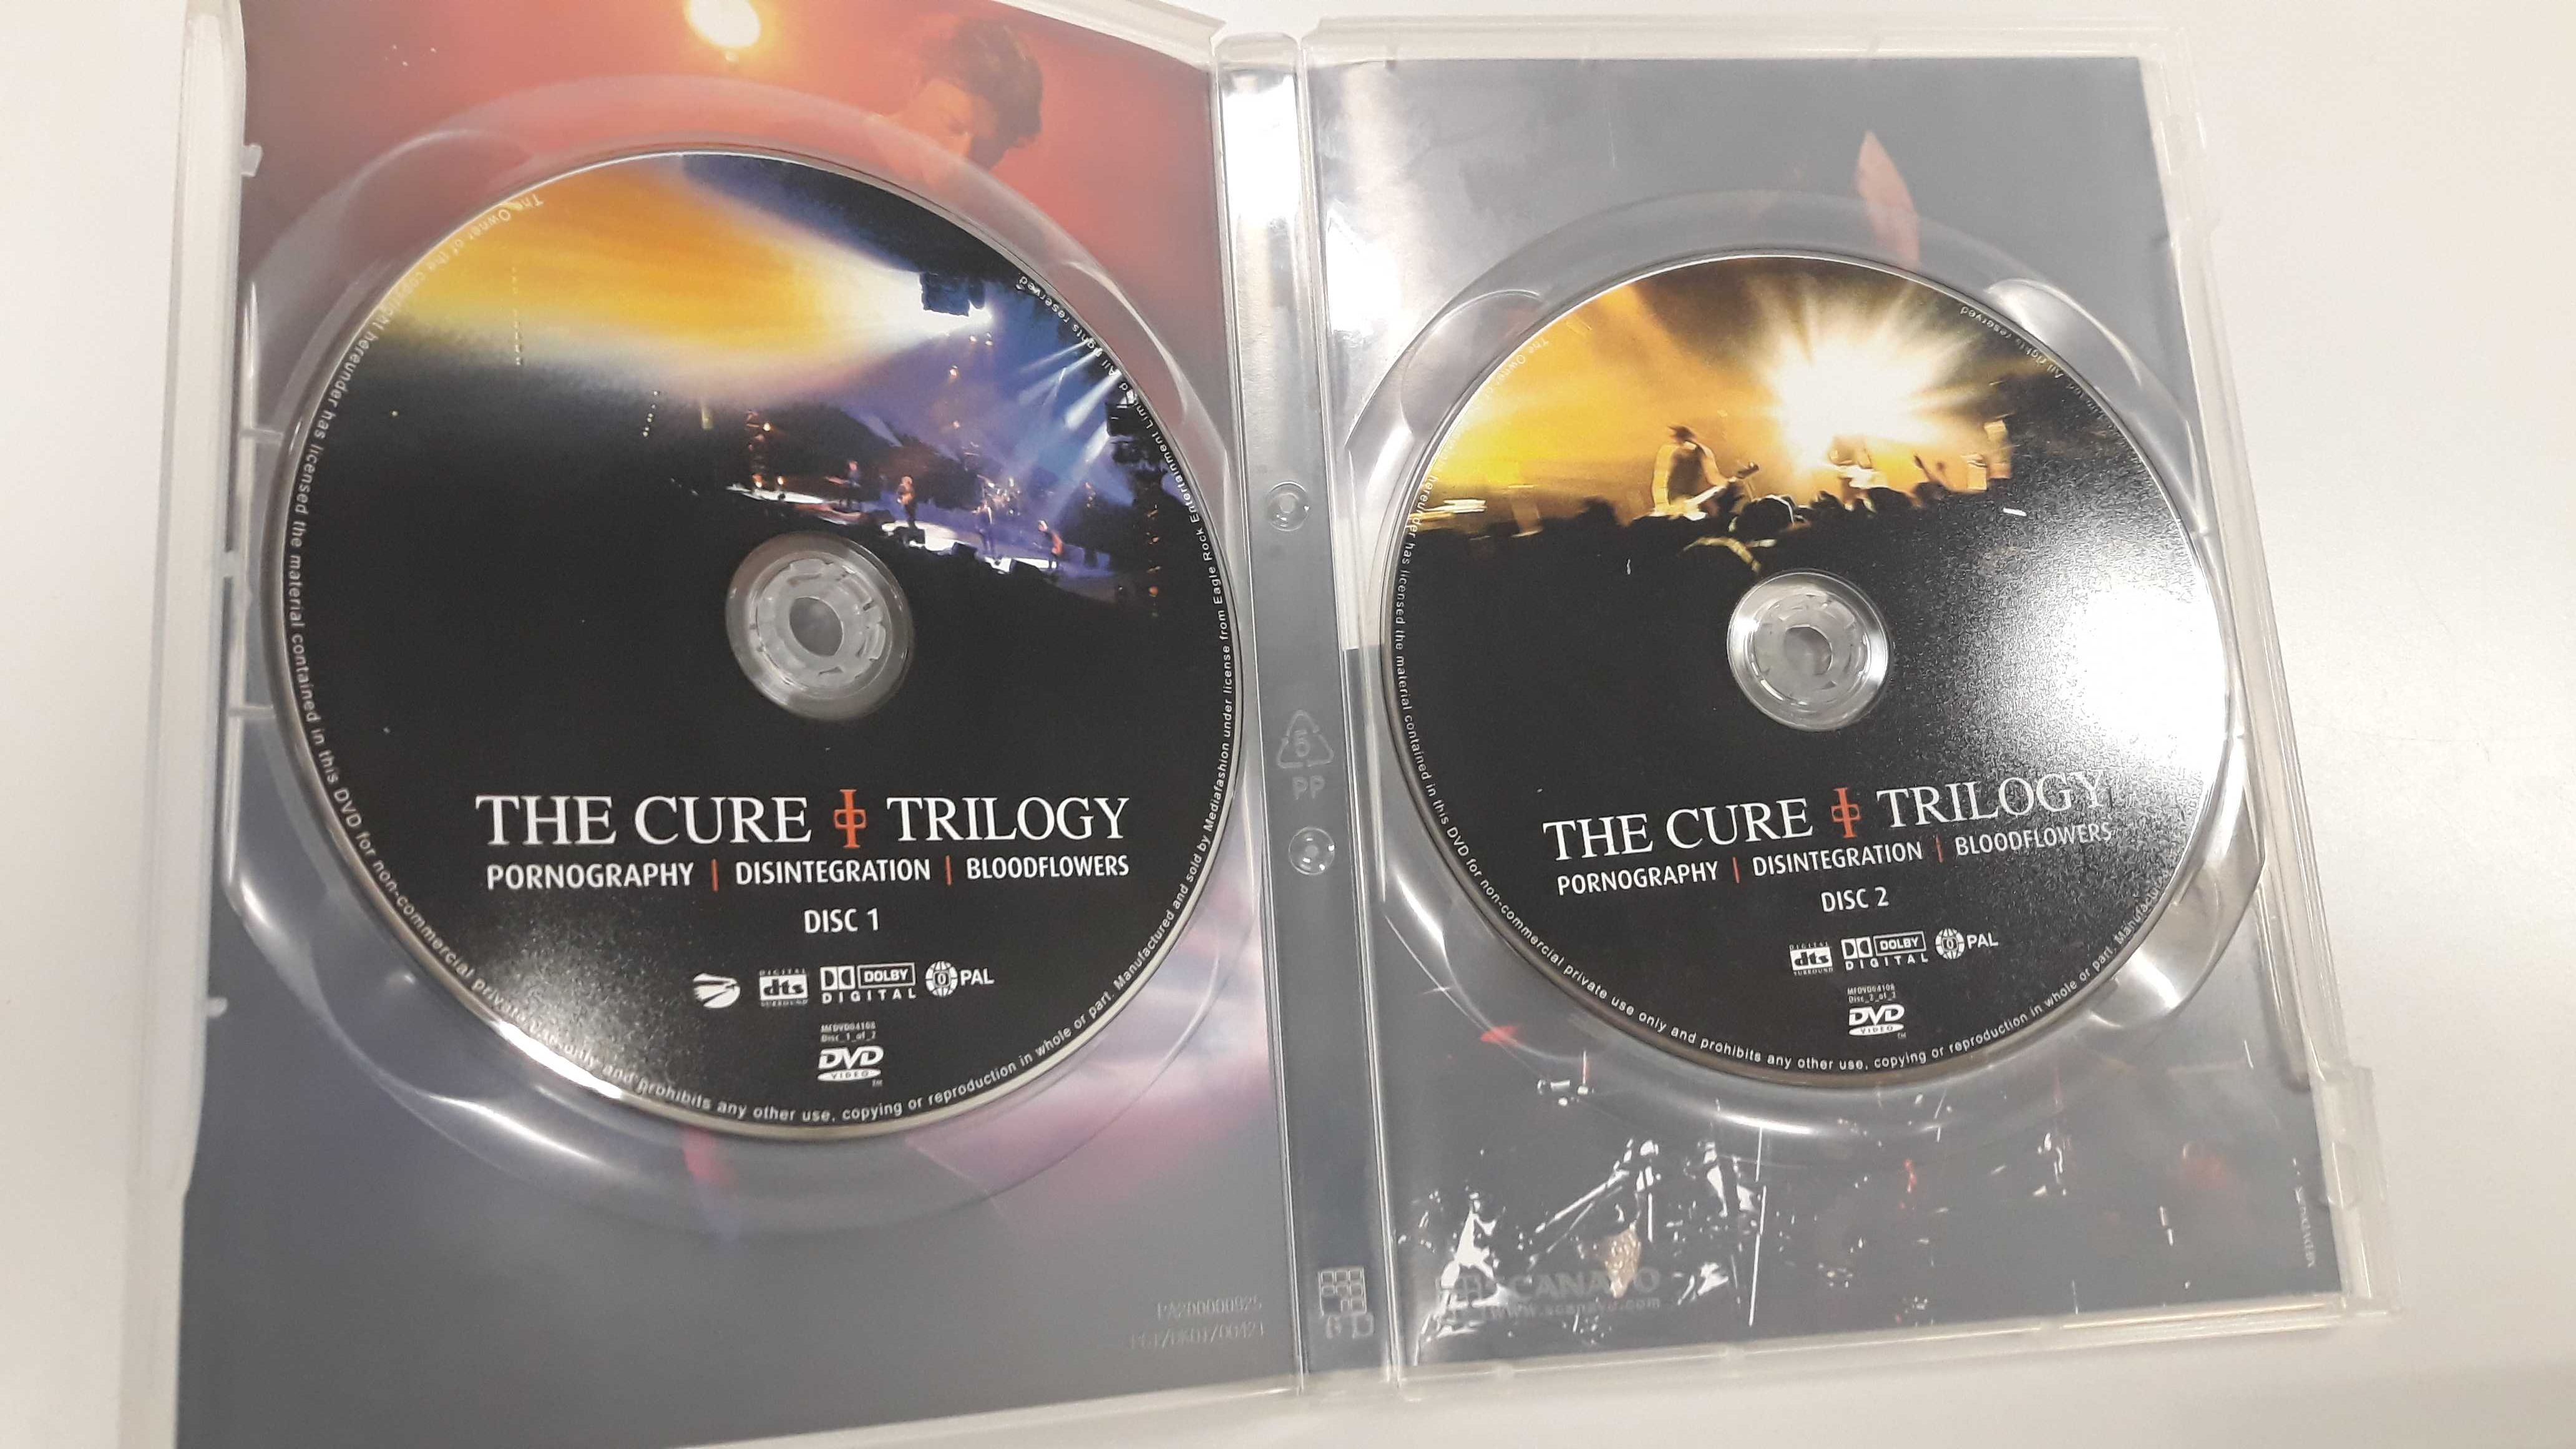 The Cure - Trilogy (DVD Duplo)